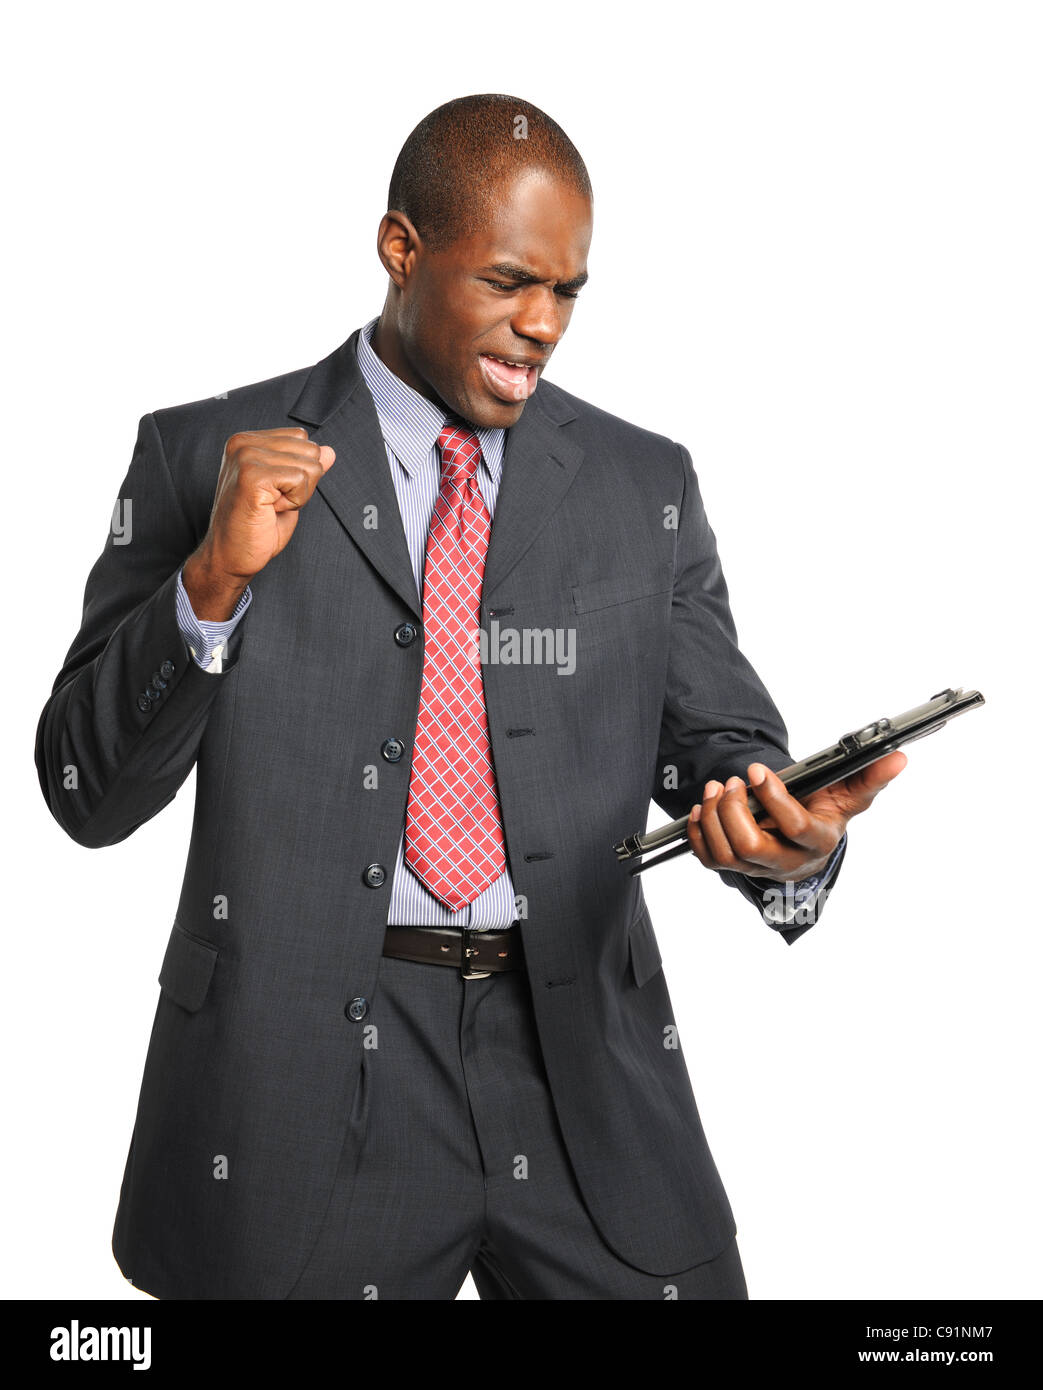 African American businessman celebrating after looking into electronic tablet Stock Photo